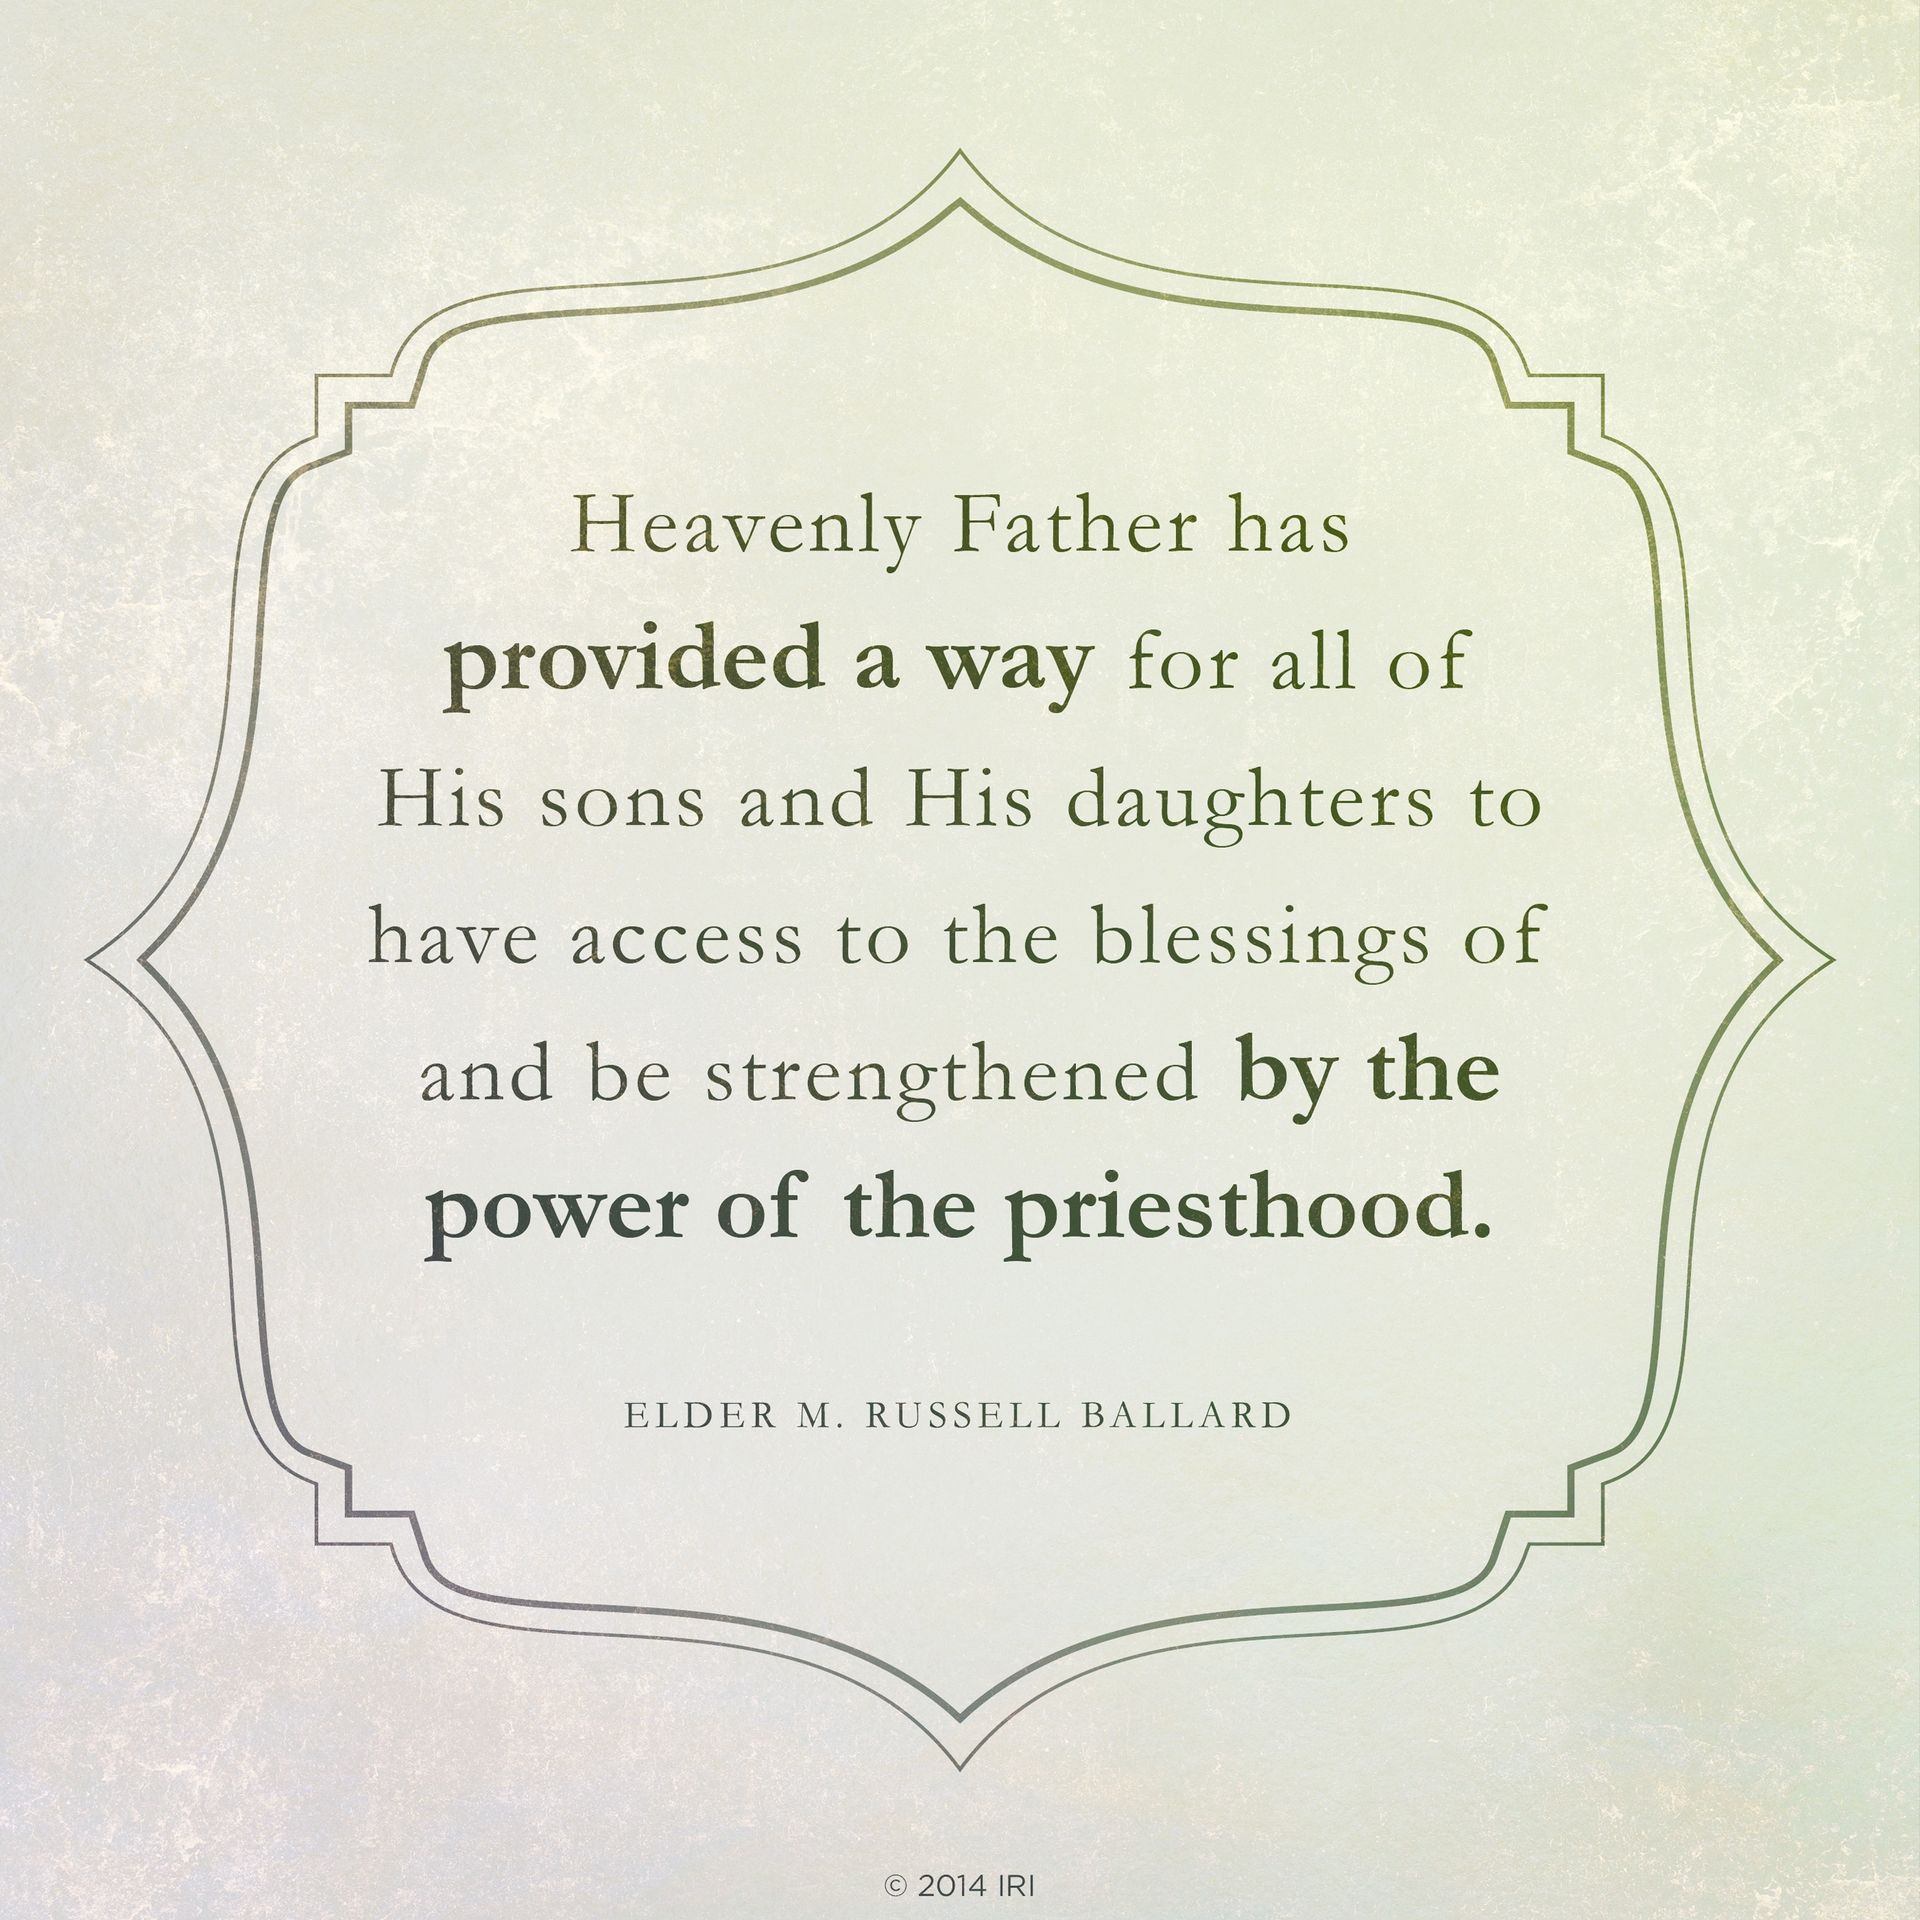 “Heavenly Father has provided a way for all of His sons and His daughters to have access to the blessings of and be strengthened by the power of the priesthood.”—Elder M. Russell Ballard, “This Is My Work and Glory”